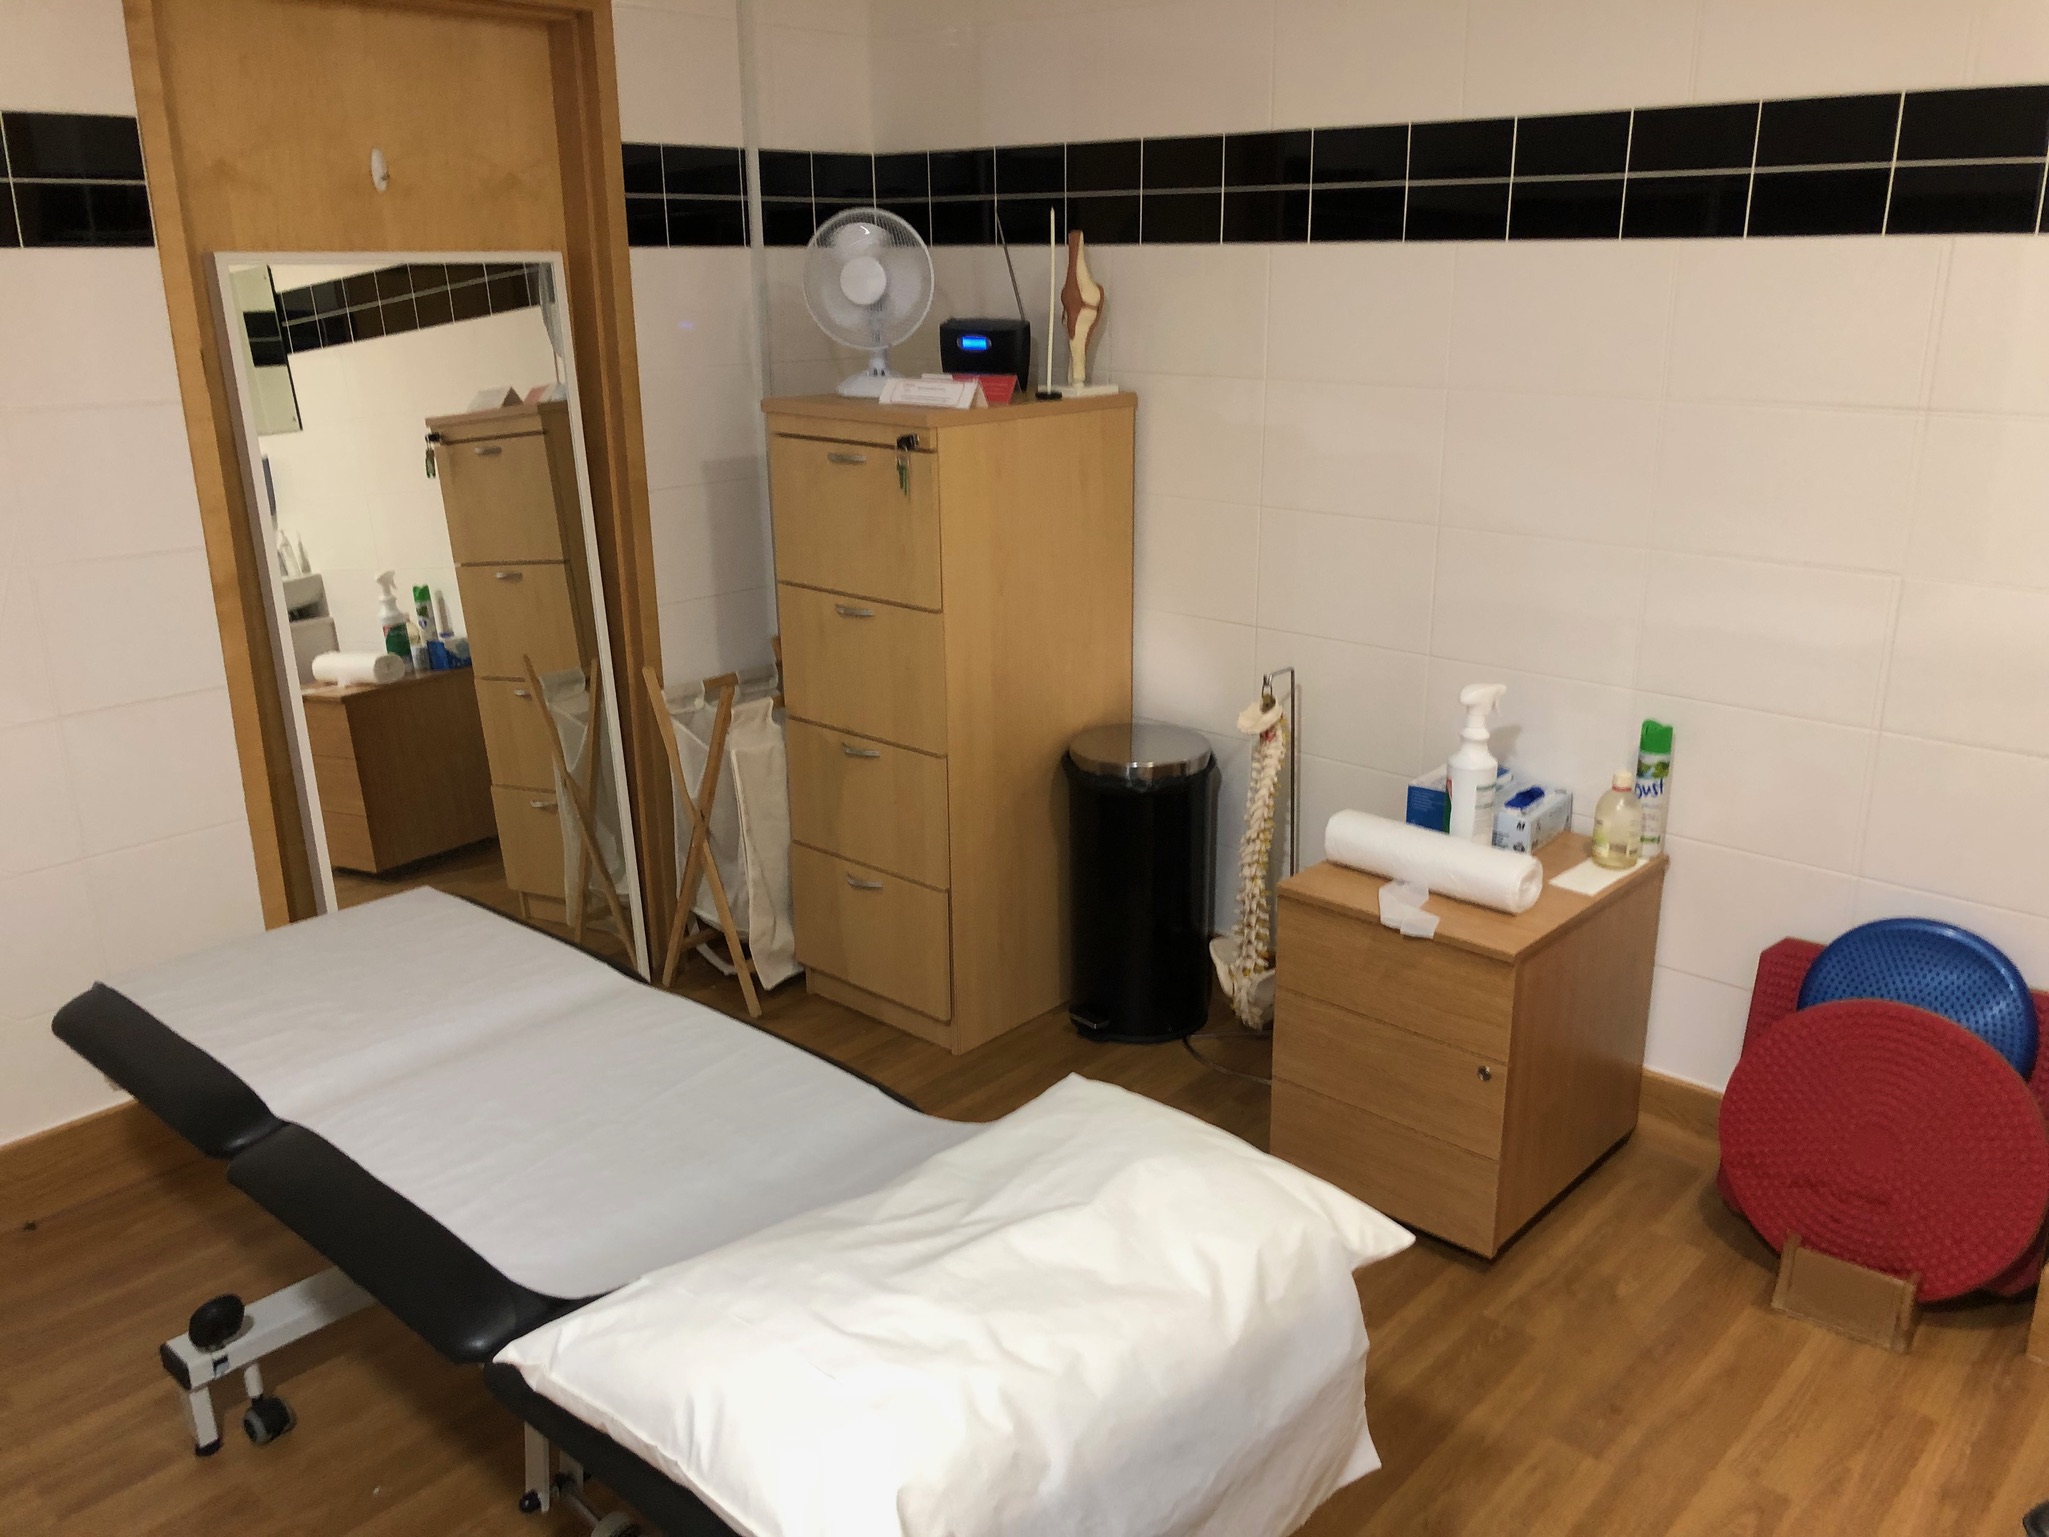 Physio treatment room at Physis Physiotherapy